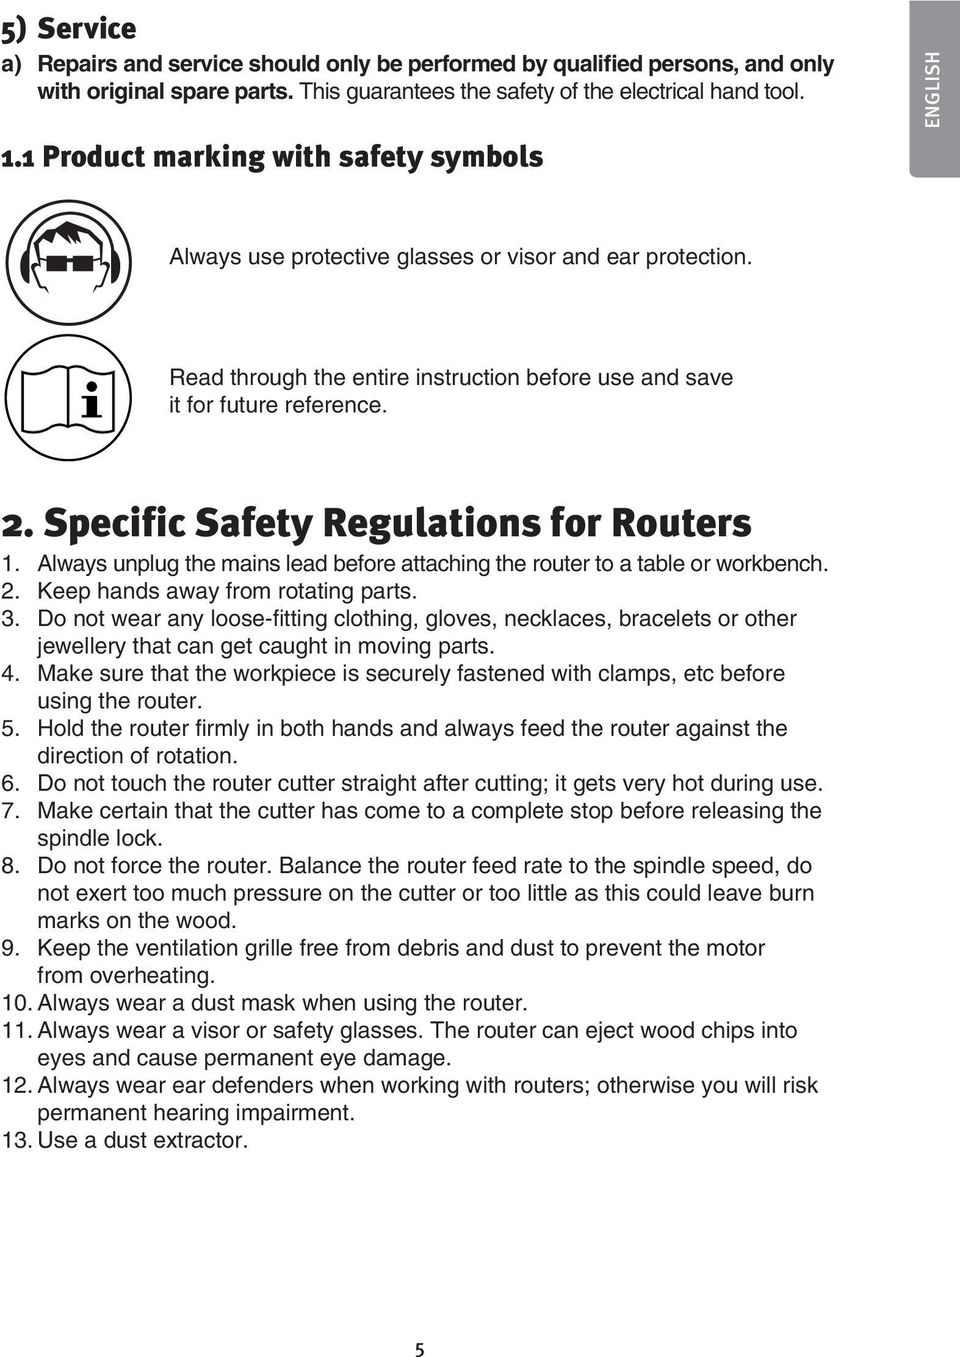 Specific Safety Regulations for Routers 1. Always unplug the mains lead before attaching the router to a table or workbench. 2. Keep hands away from rotating parts. 3.